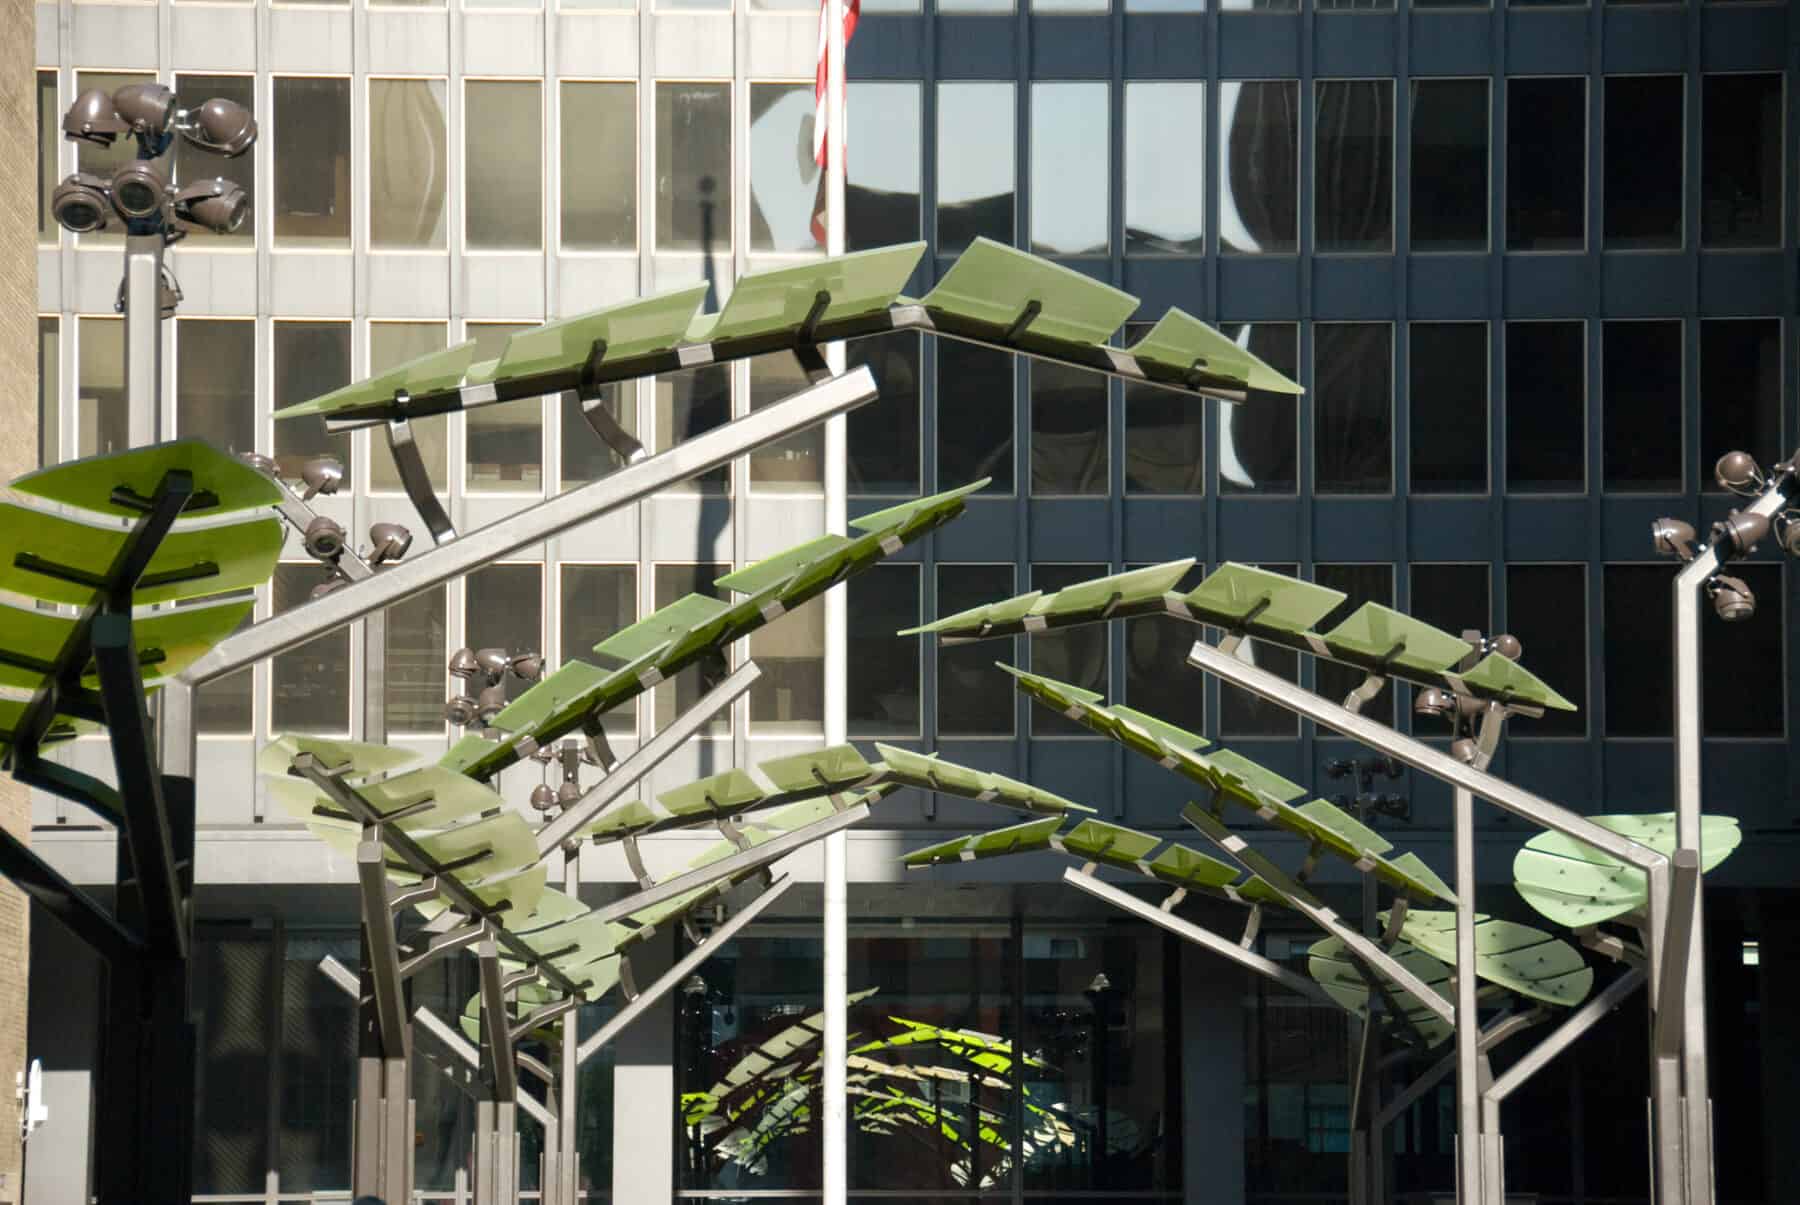 Custom Fabrication of Architectural Acrylic Tree Leaves with Metal Branches from Construction Specialty Projects by Commercial Builder & General Contractor Structural Enterprises